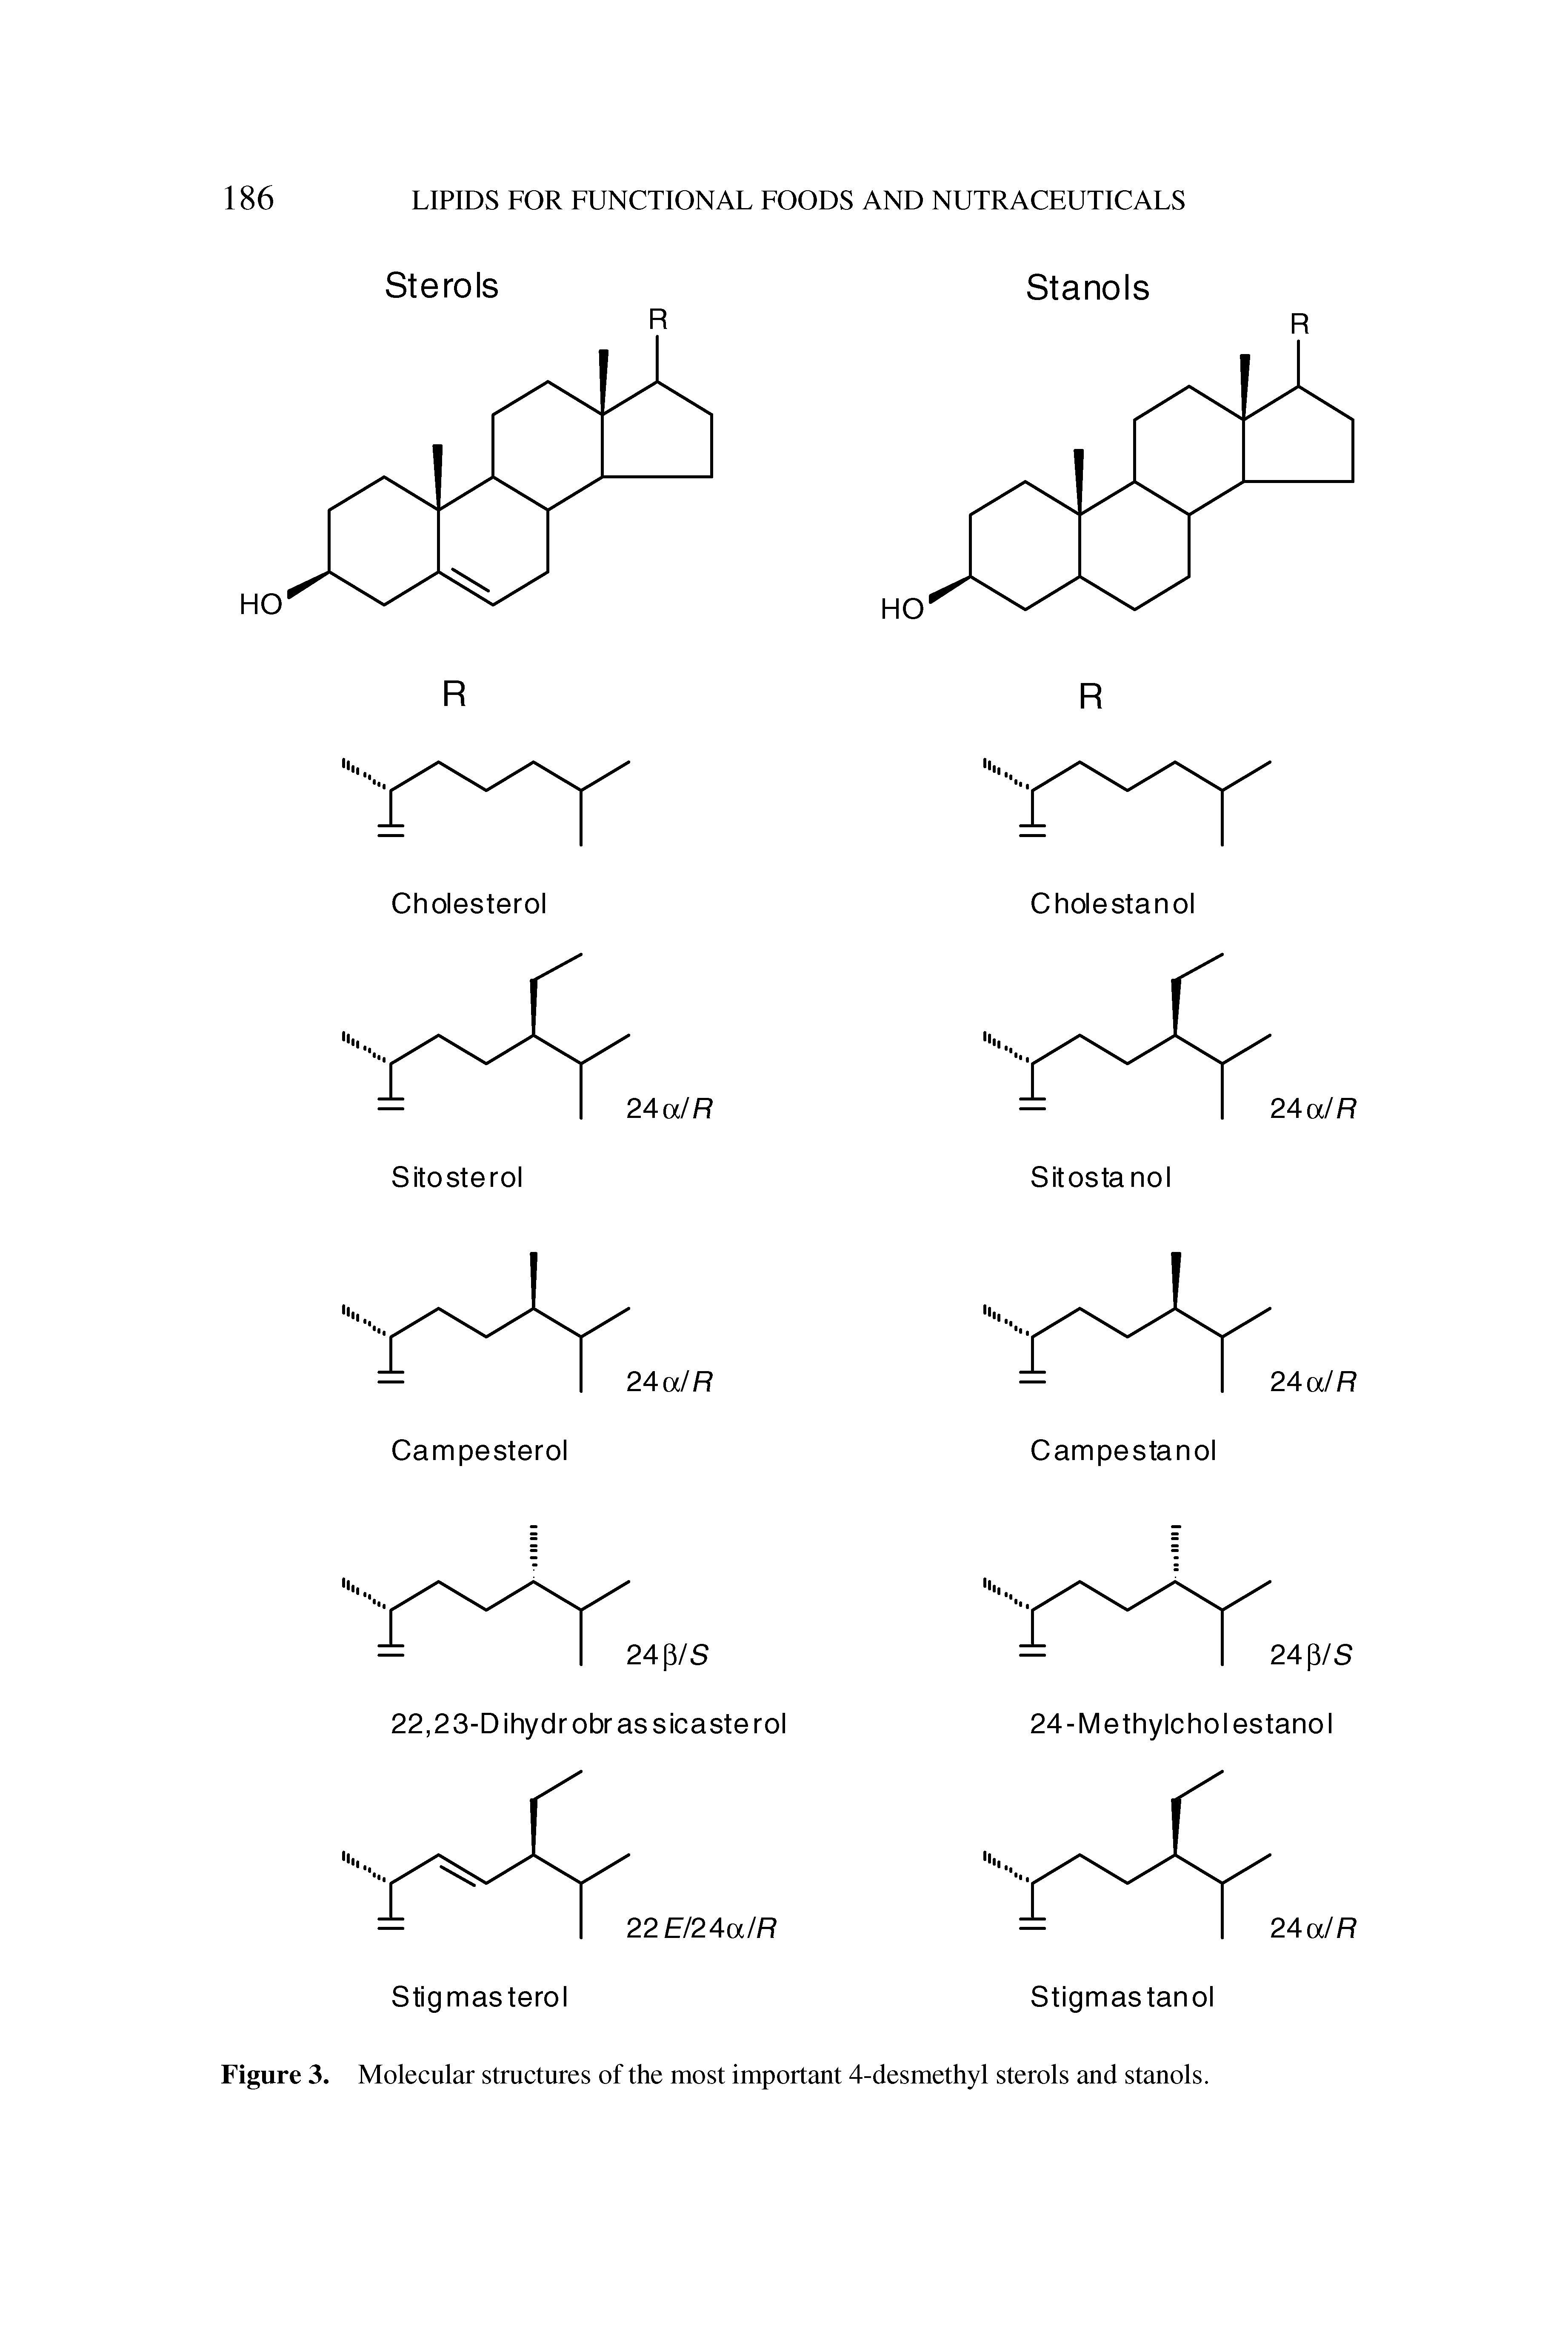 Figure 3. Molecular structures of the most important 4-desmethyl sterols and stanols.